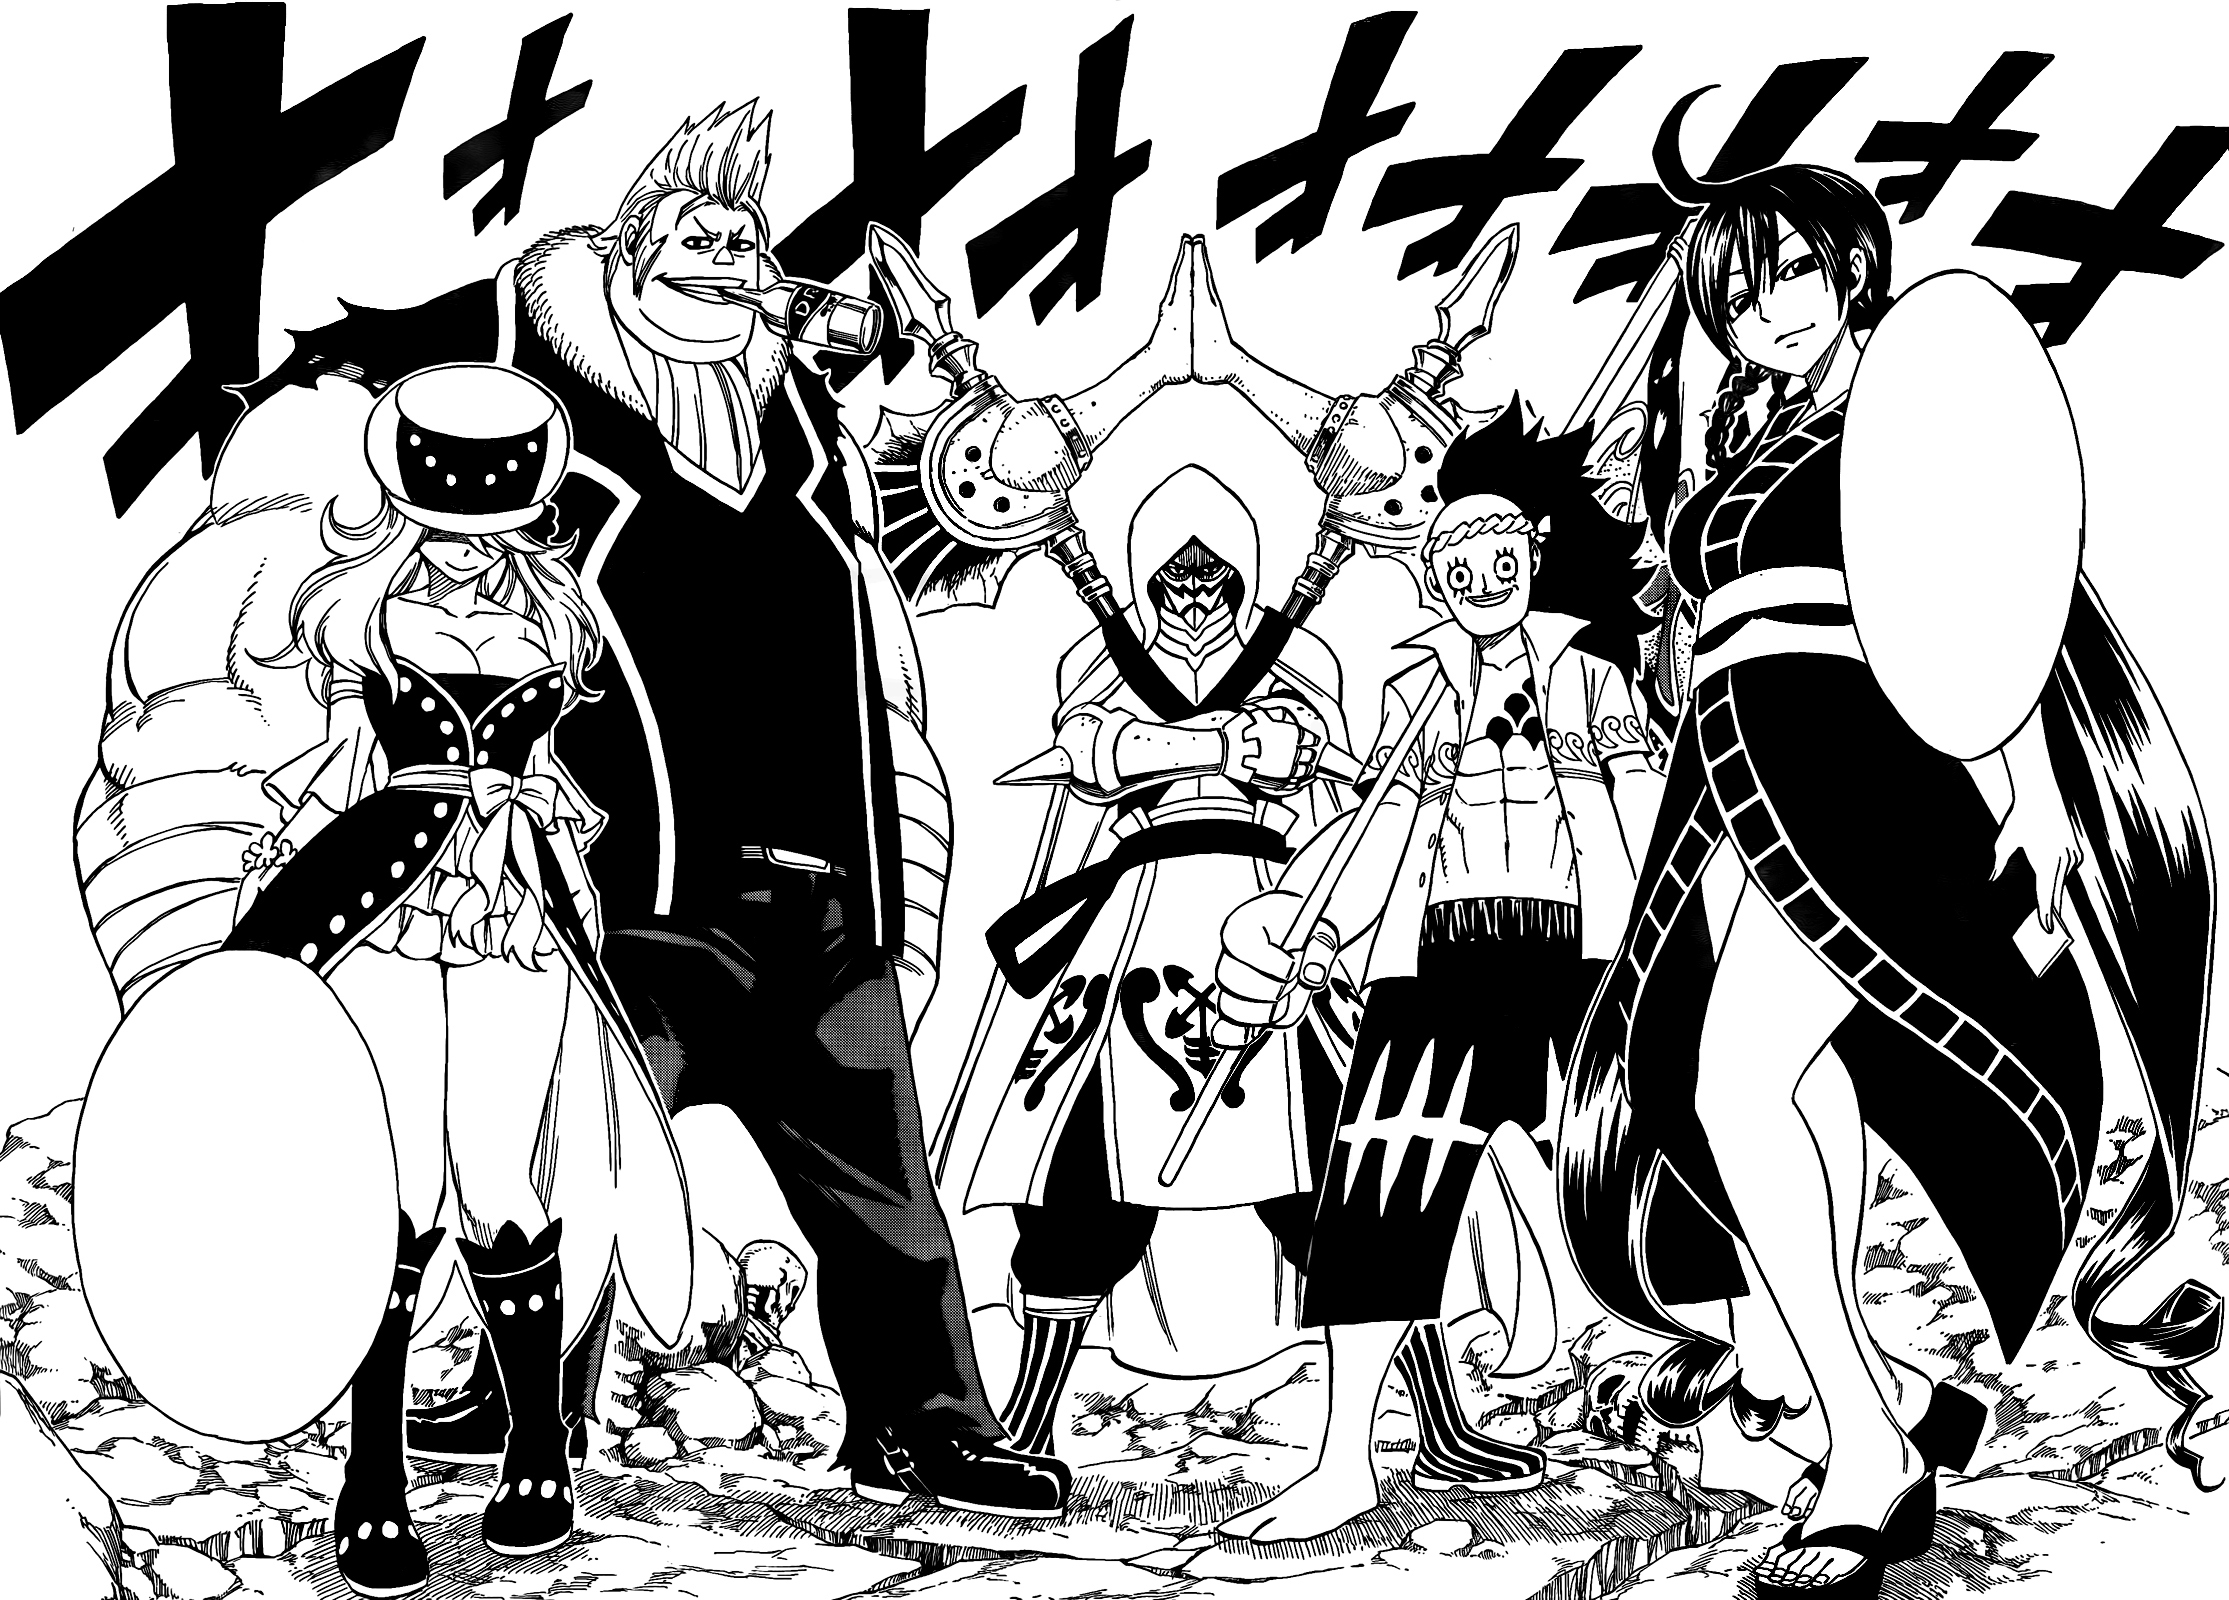 10 Weakest Fairy Tail Characters, Ranked